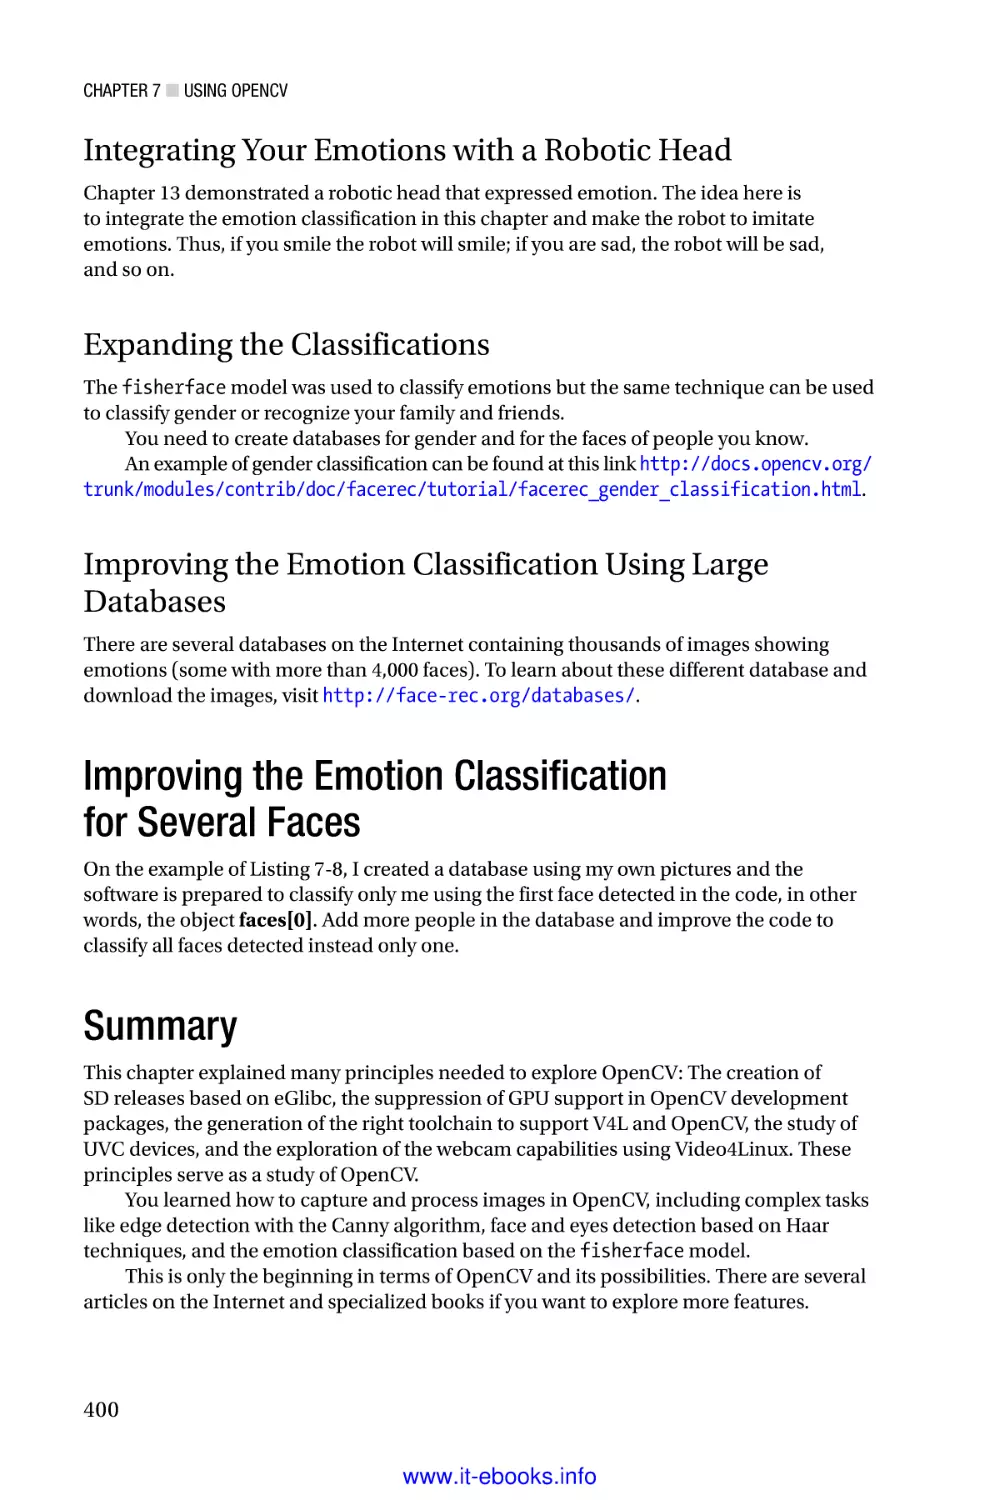 Integrating Your Emotions with a Robotic Head
Expanding the Classifications
Improving the Emotion Classification Using Large Databases
Improving the Emotion Classification for Several Faces
Summary